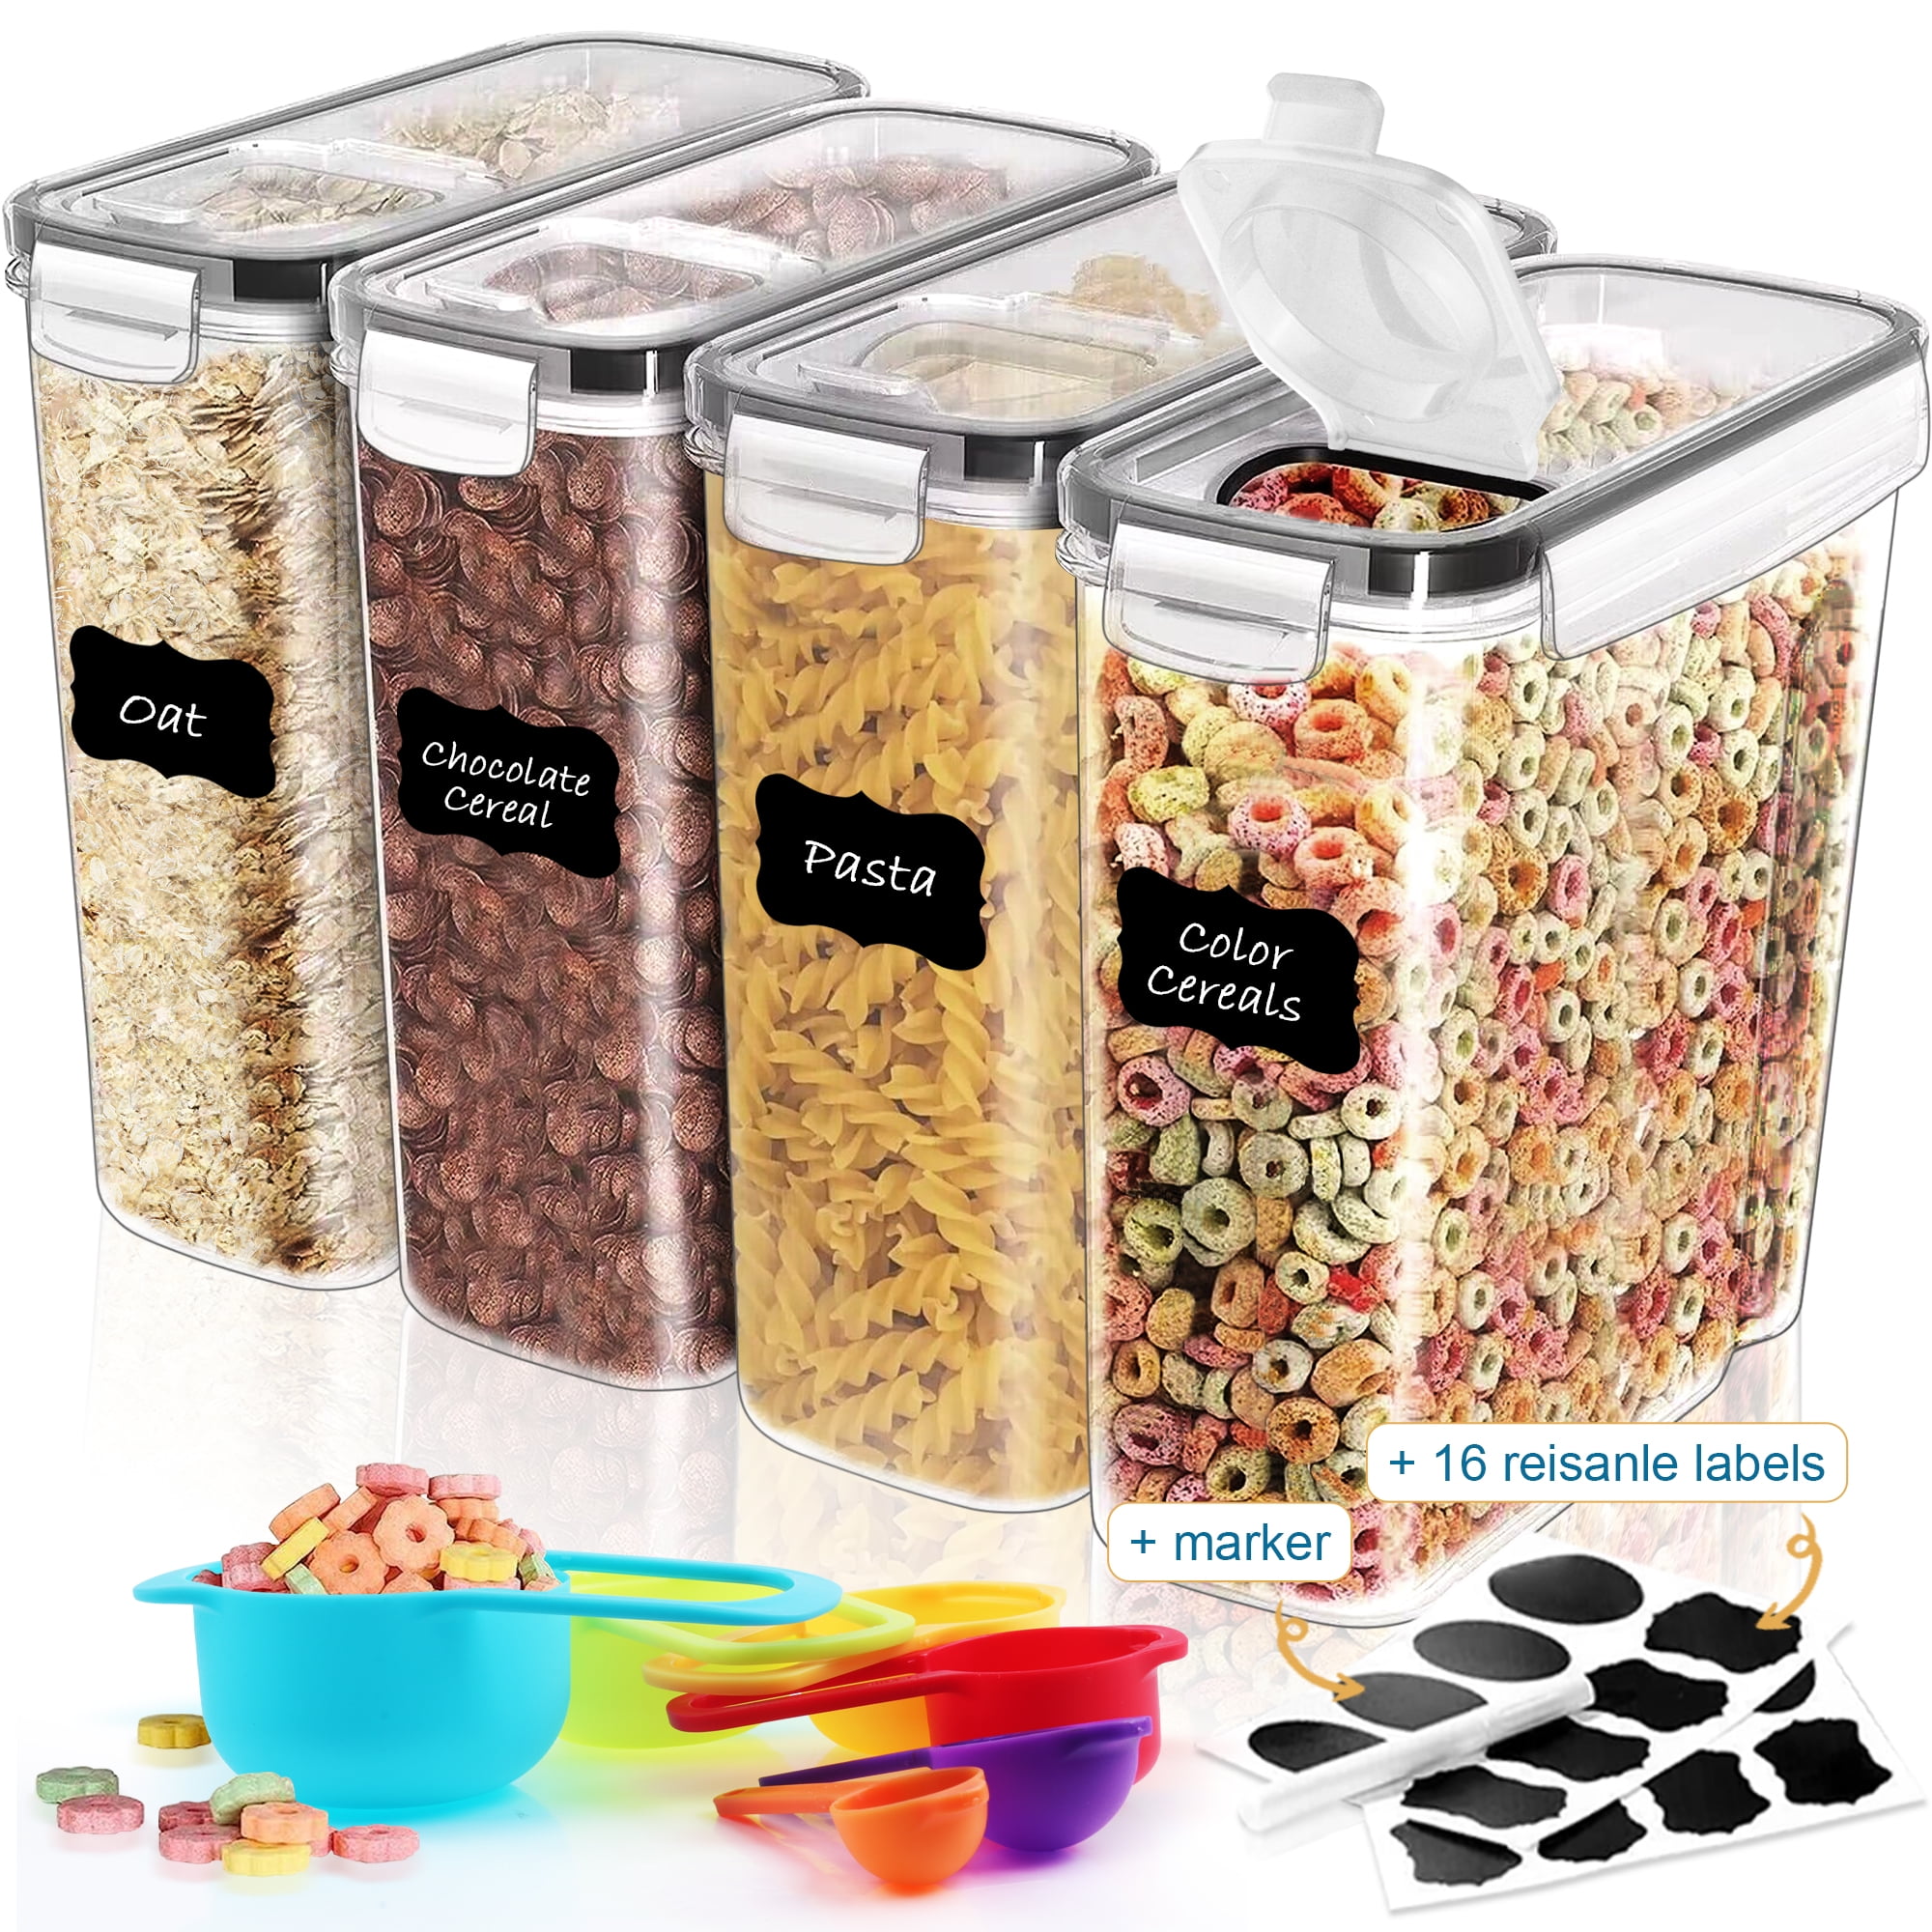 Aoibox 4-Piece/4L Airtight Food Storage Containers Set for Kitchen and  Pantry Organization, Cereal Storage Container, BPA Free SNPH002IN367 - The  Home Depot